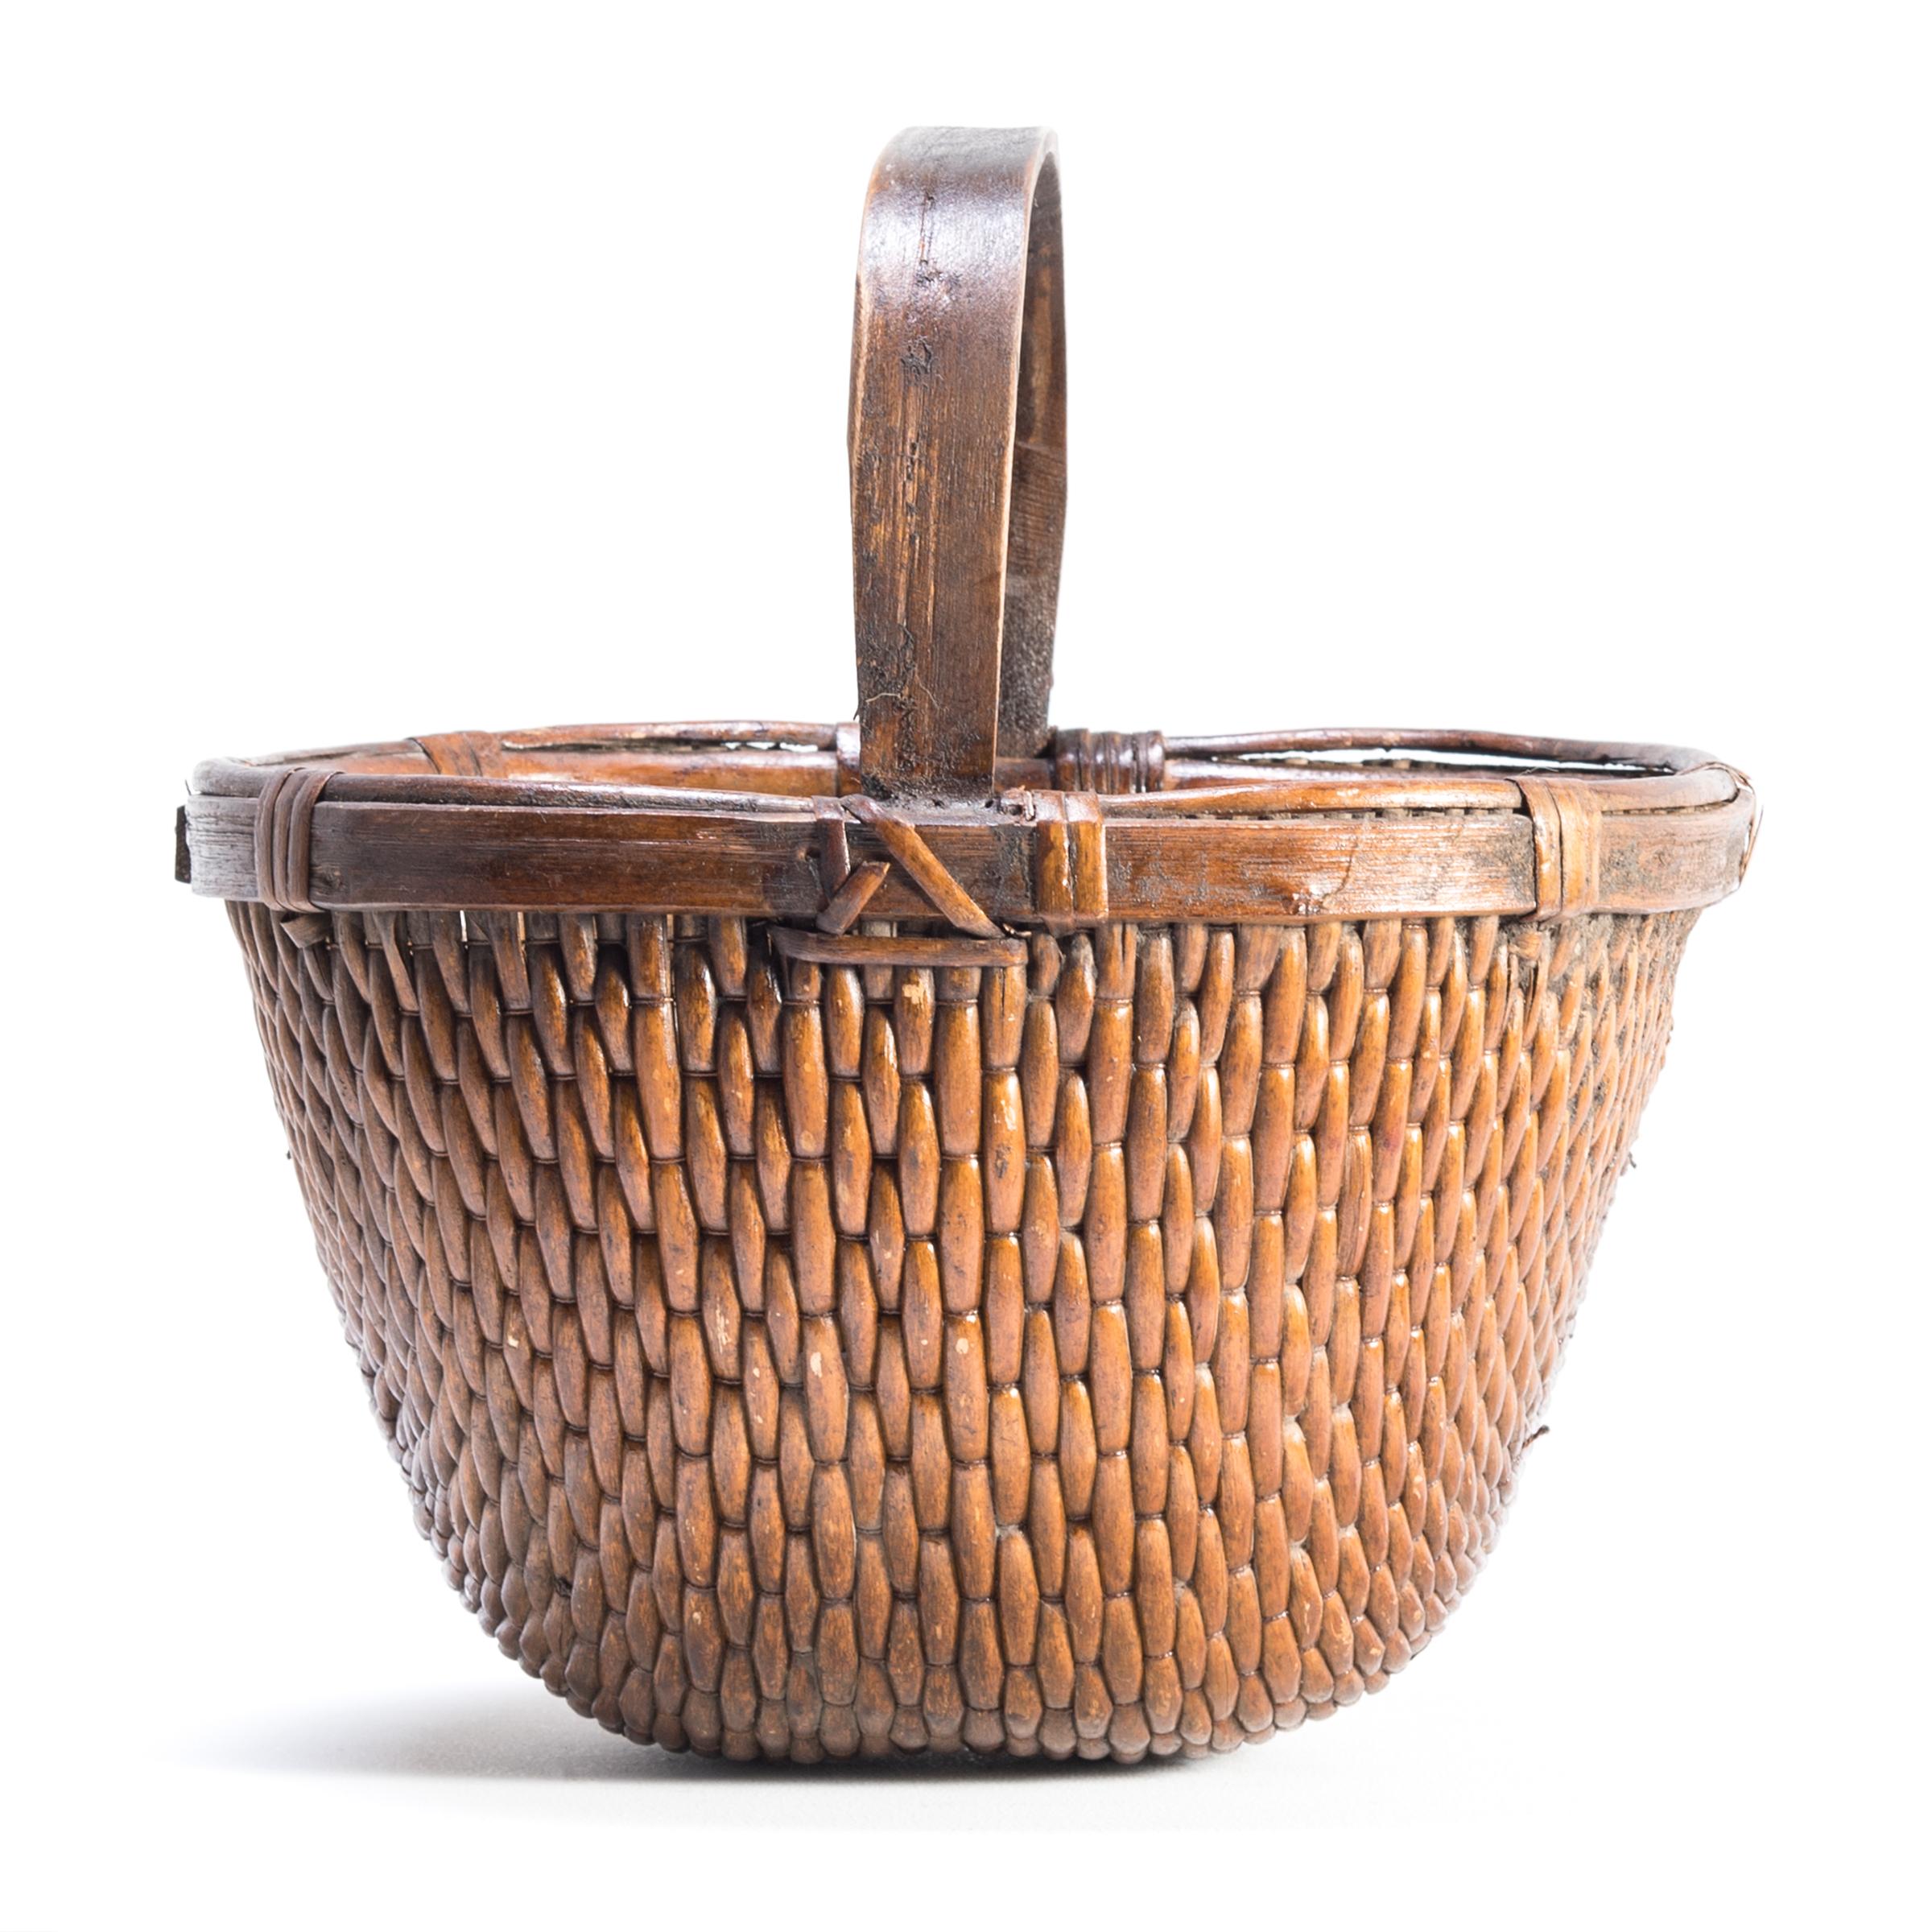 It is easy to imagine someone, long ago, walking to market on a beautiful summer day with this beautiful basket slung over their arm. Basket making is an ancient and humble craft, but in the hands of a truly skilled weaver willow branches, like